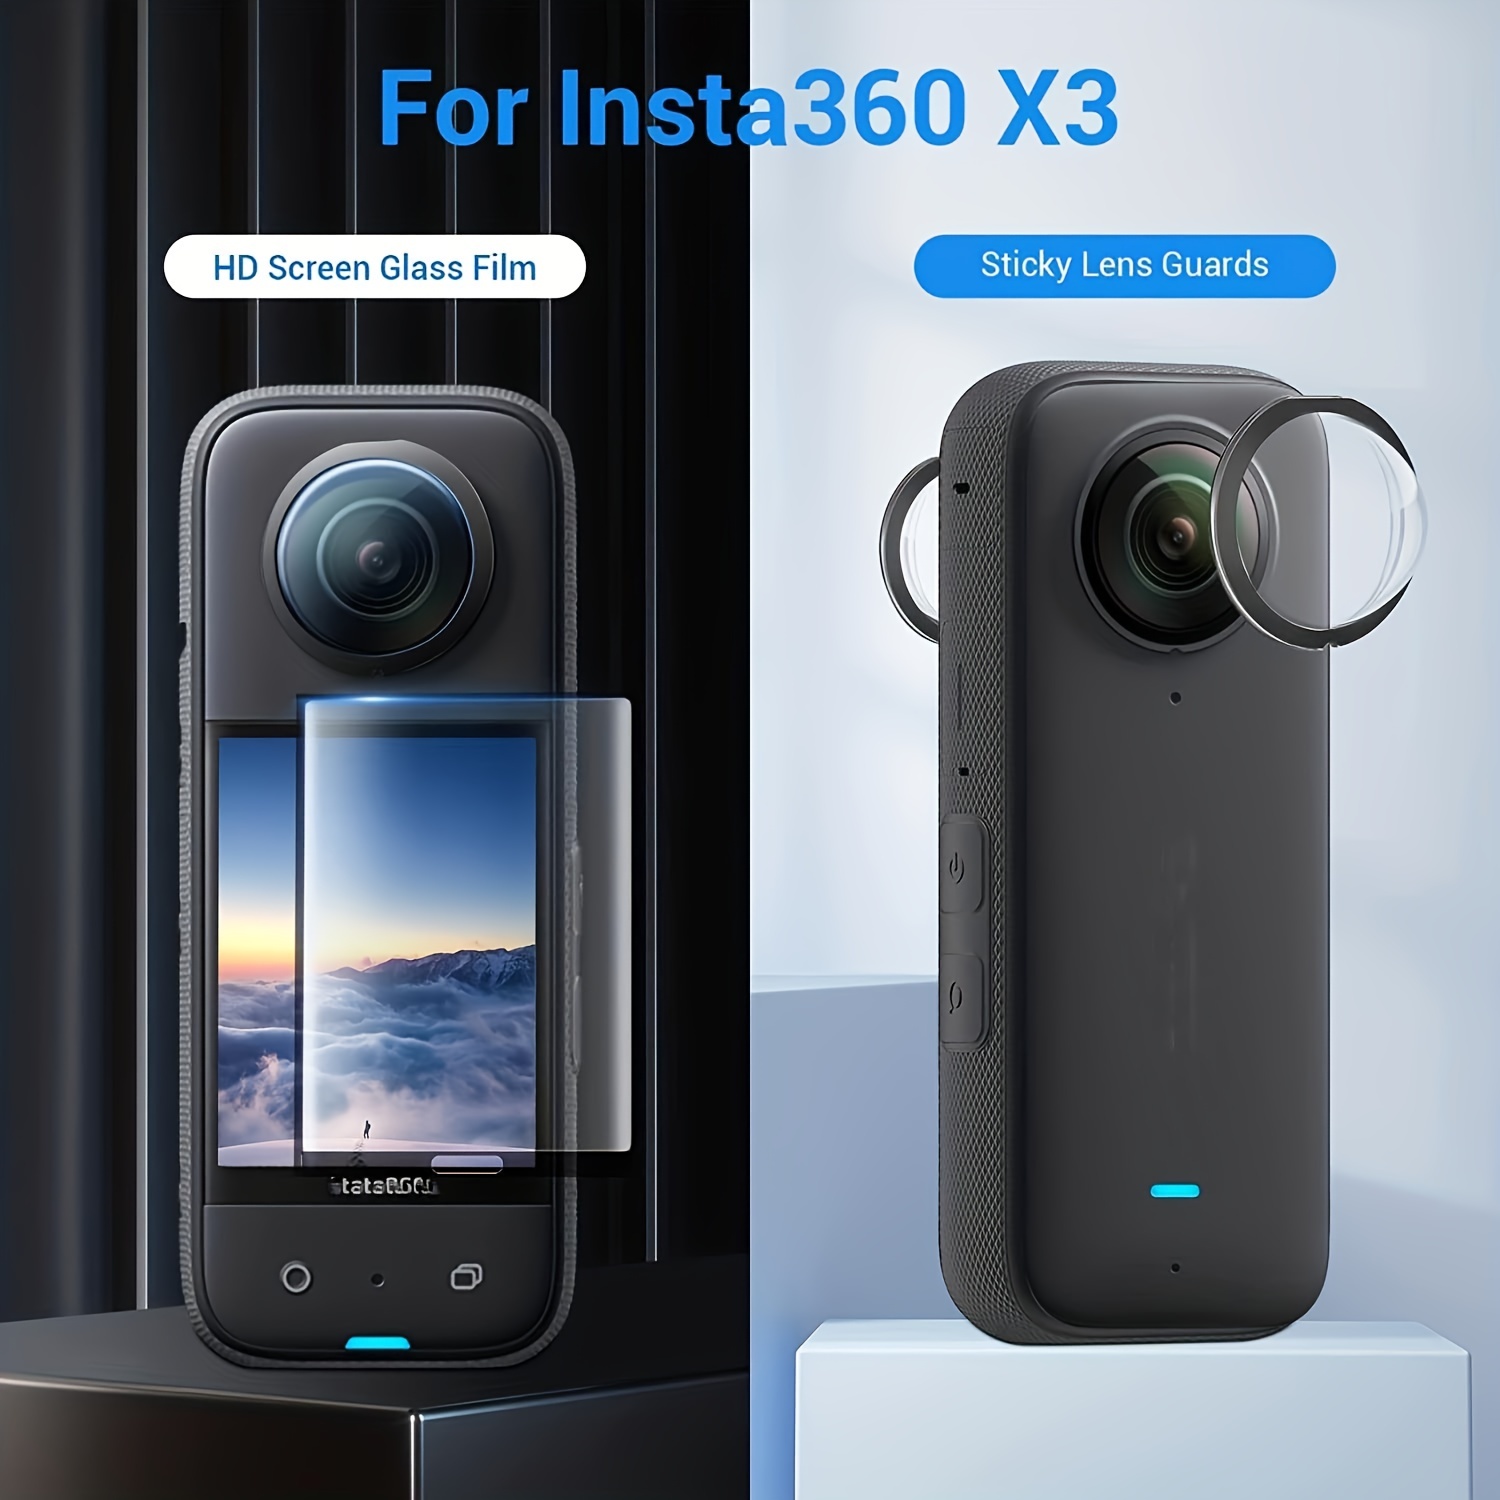 Must Have Accessories for your Insta360 X3